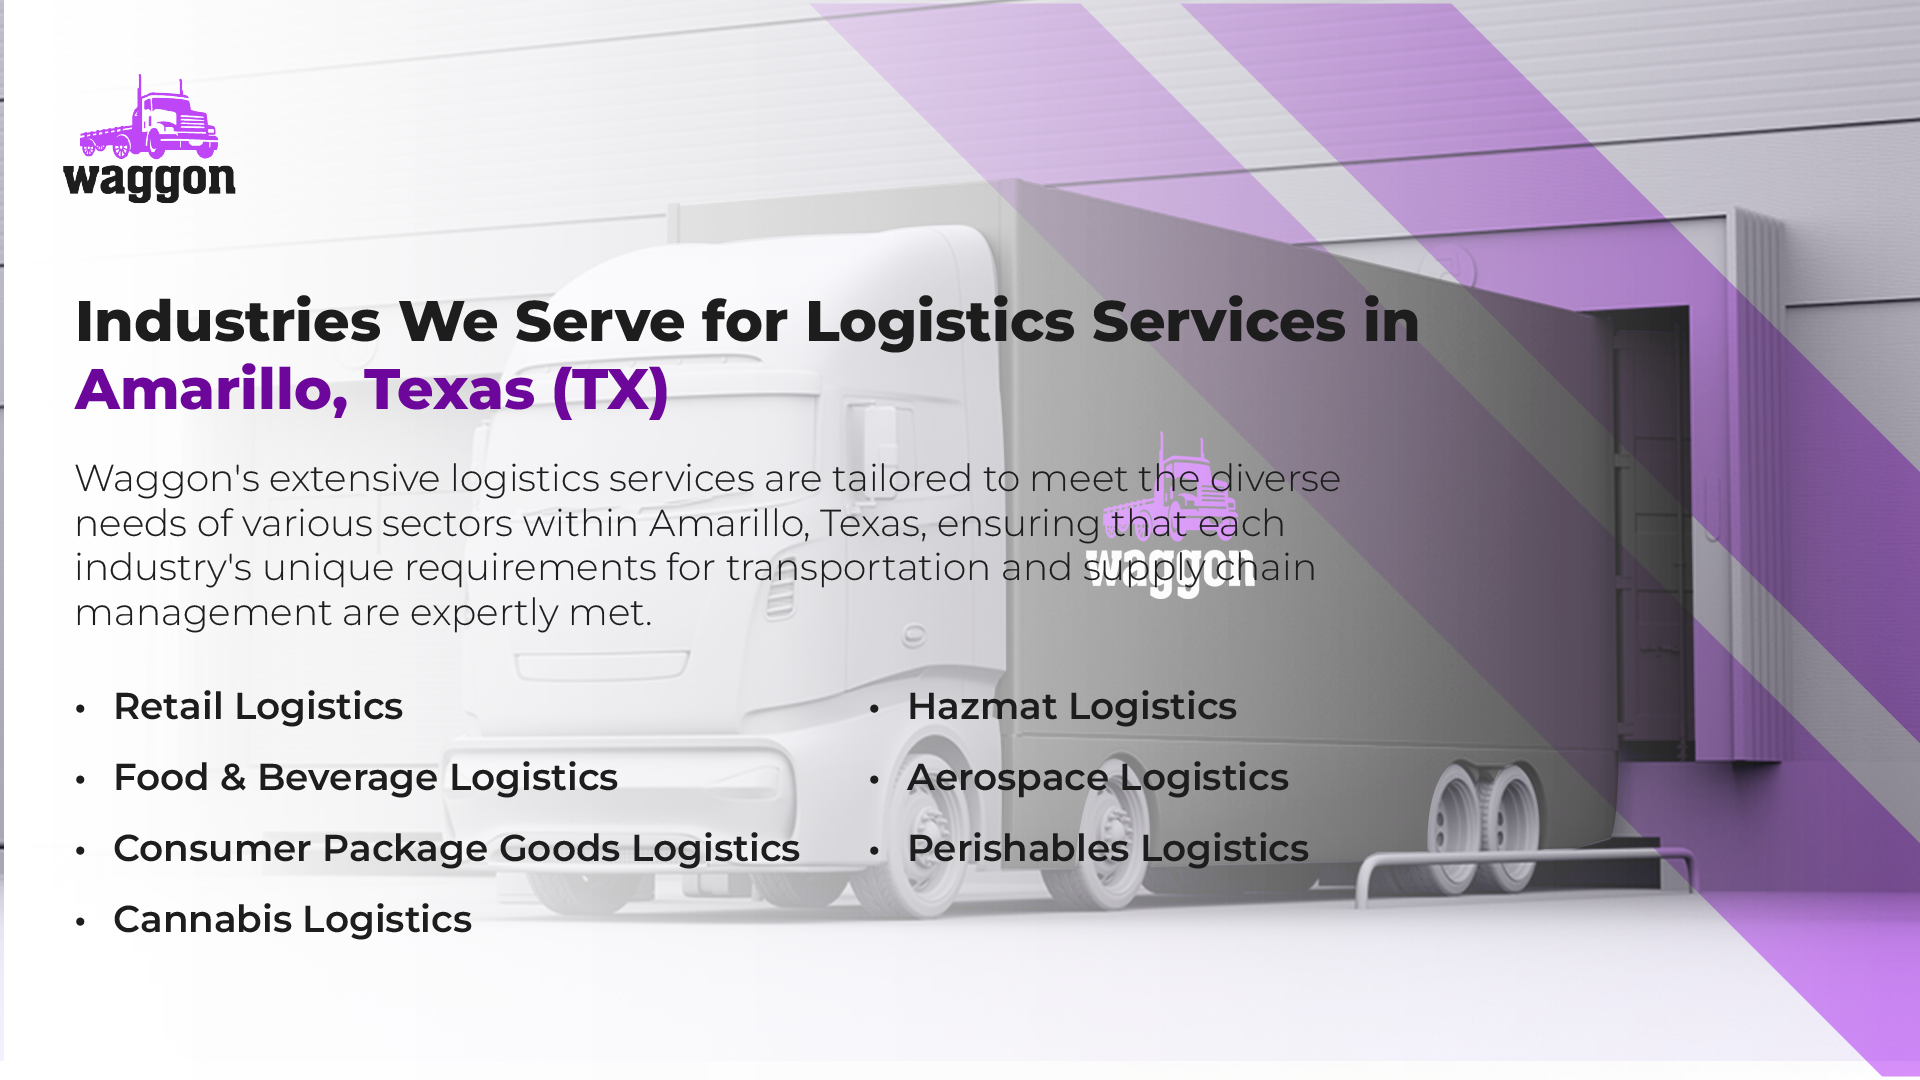 Industries We Serve for Logistics Services in Amarillo, Texas (TX)